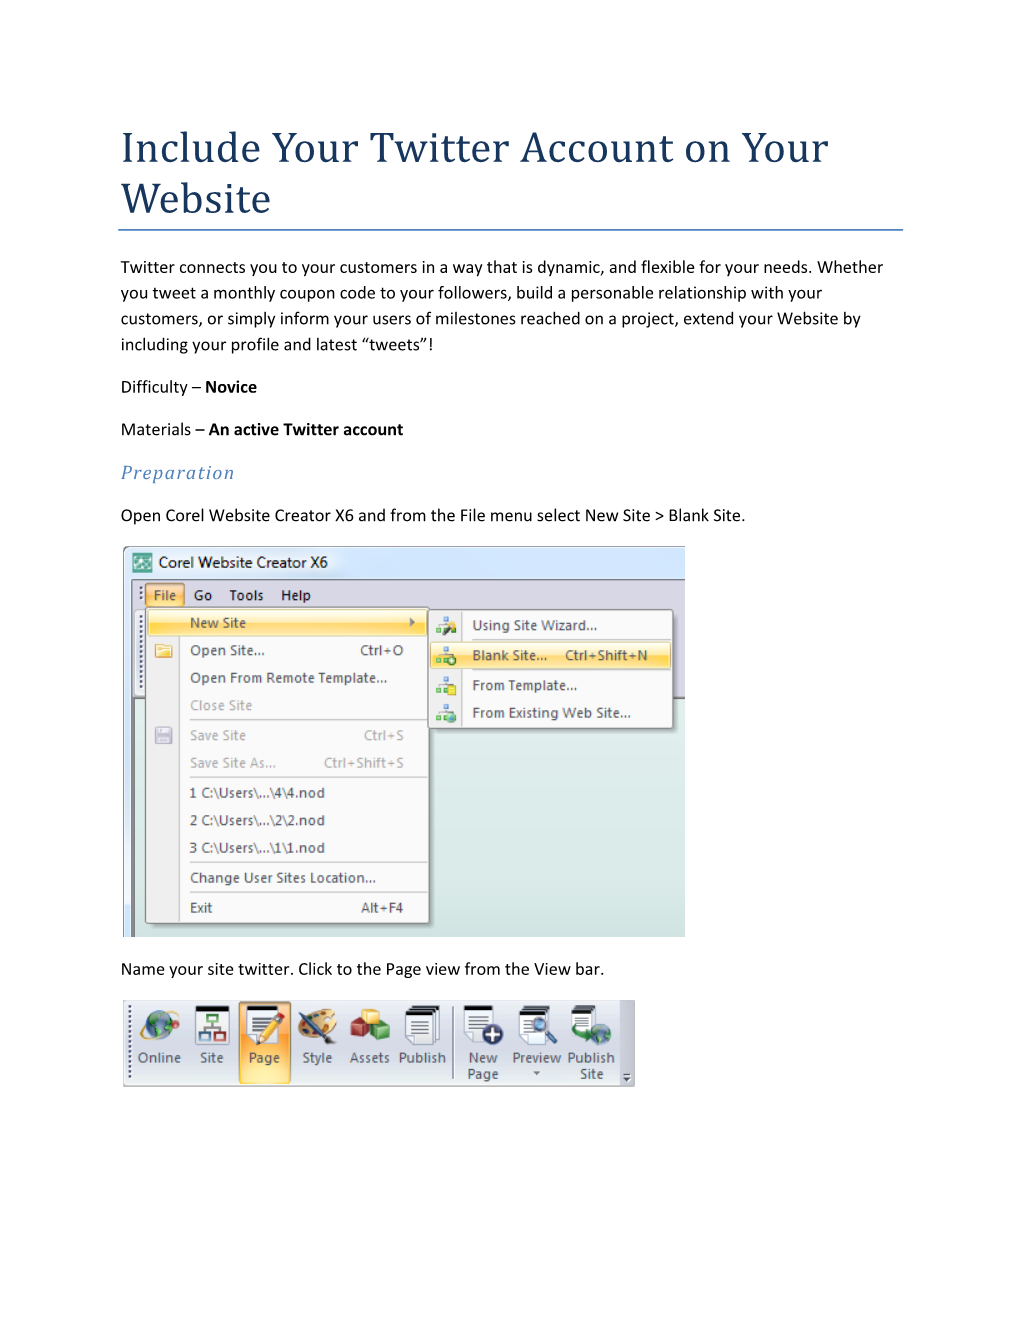 Include Your Twitter Account on Your Website